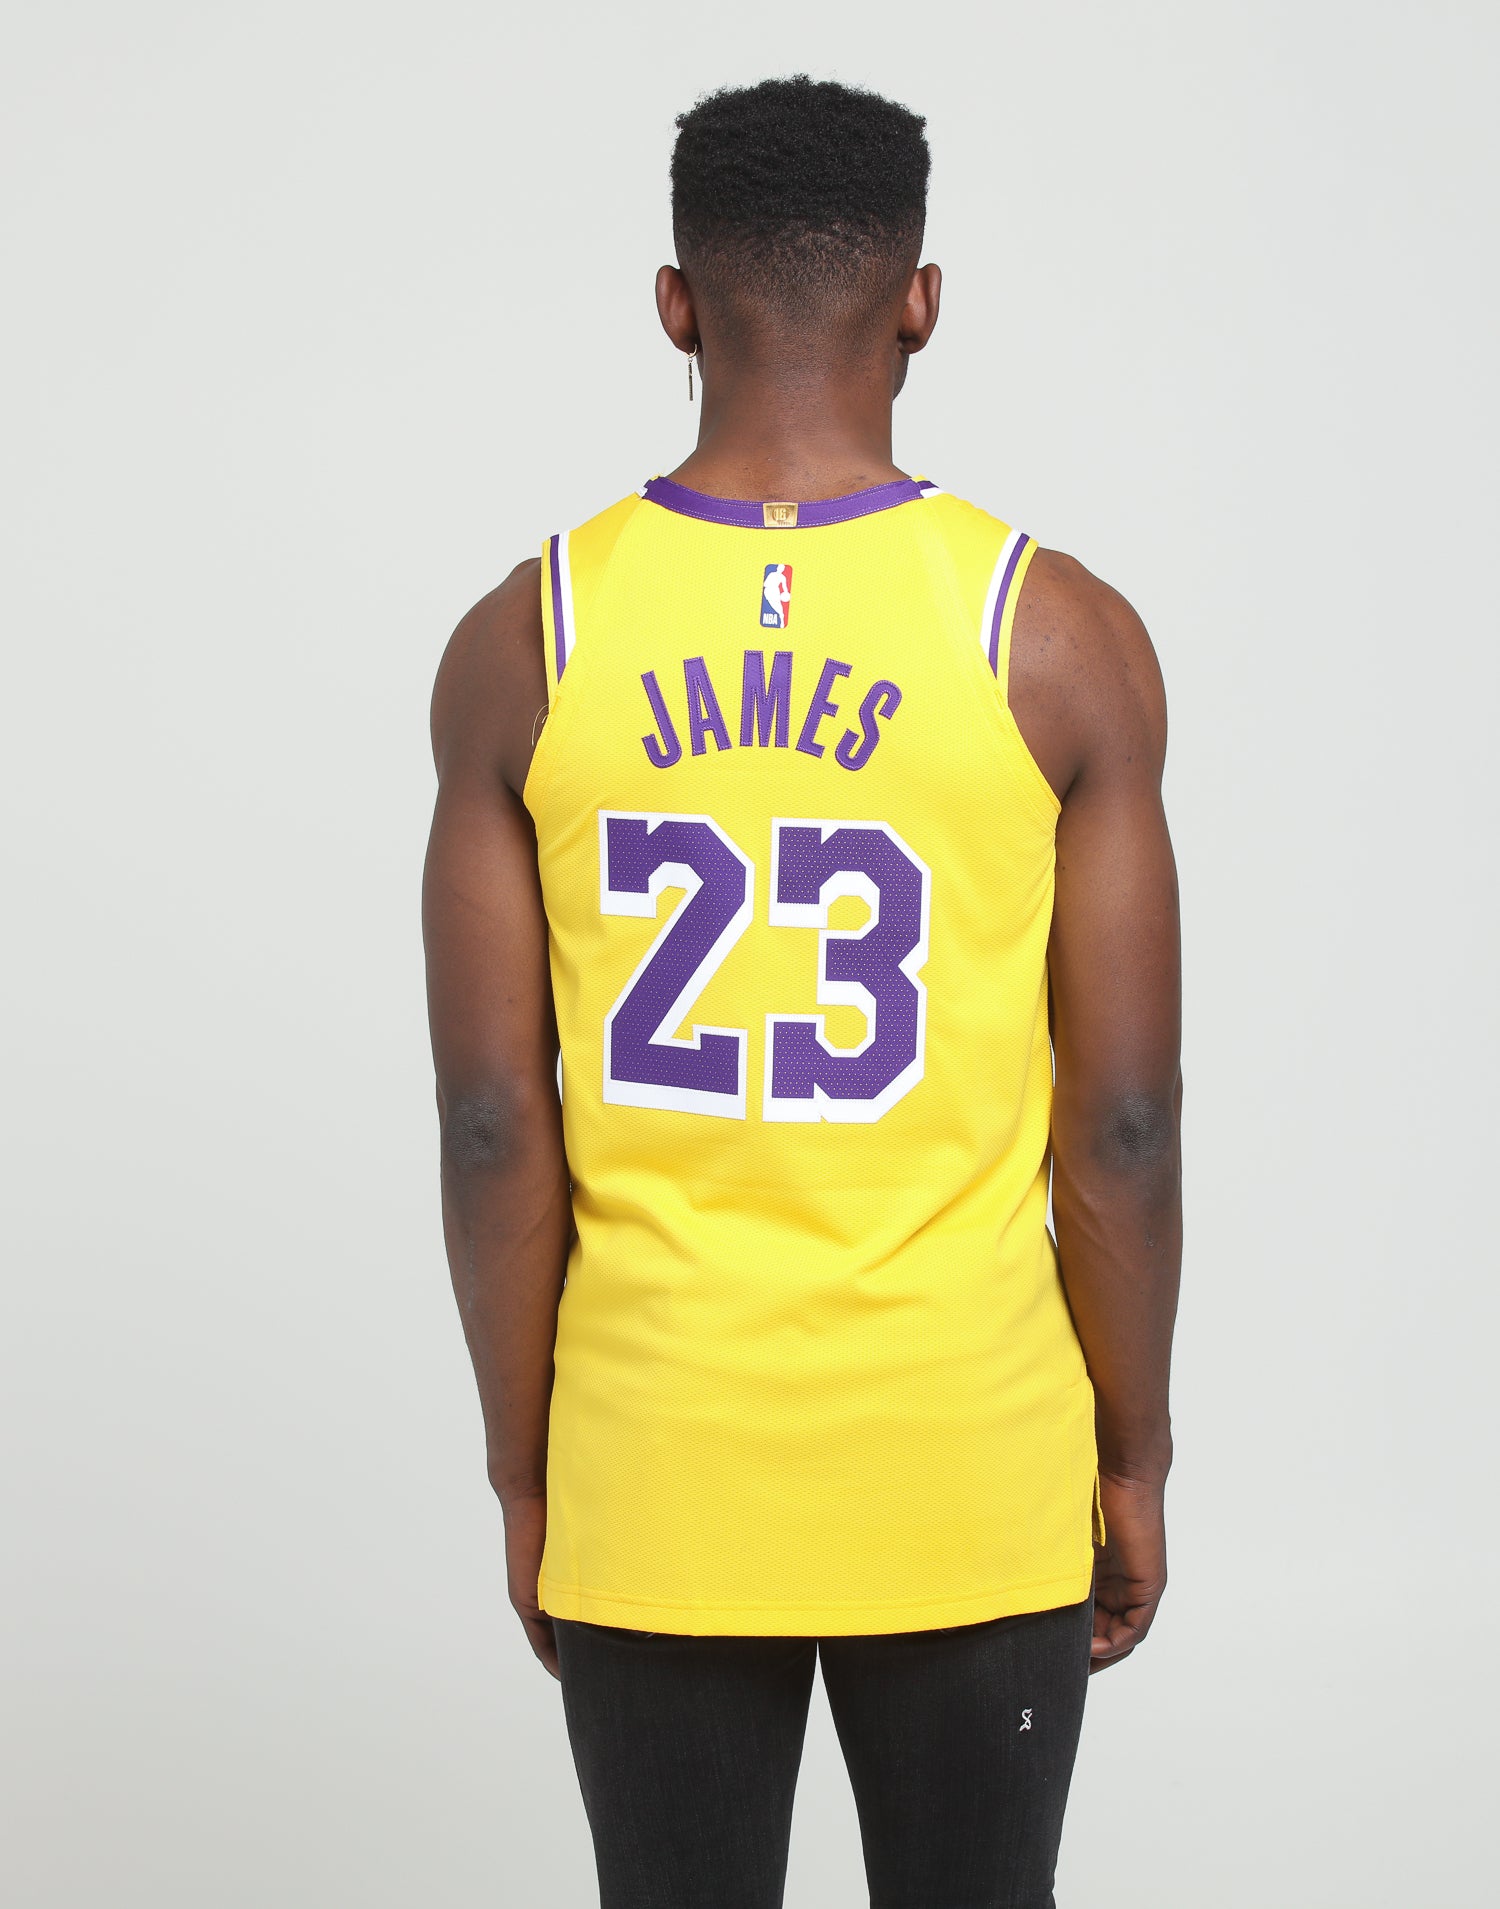 lebron james authentic jersey lakers